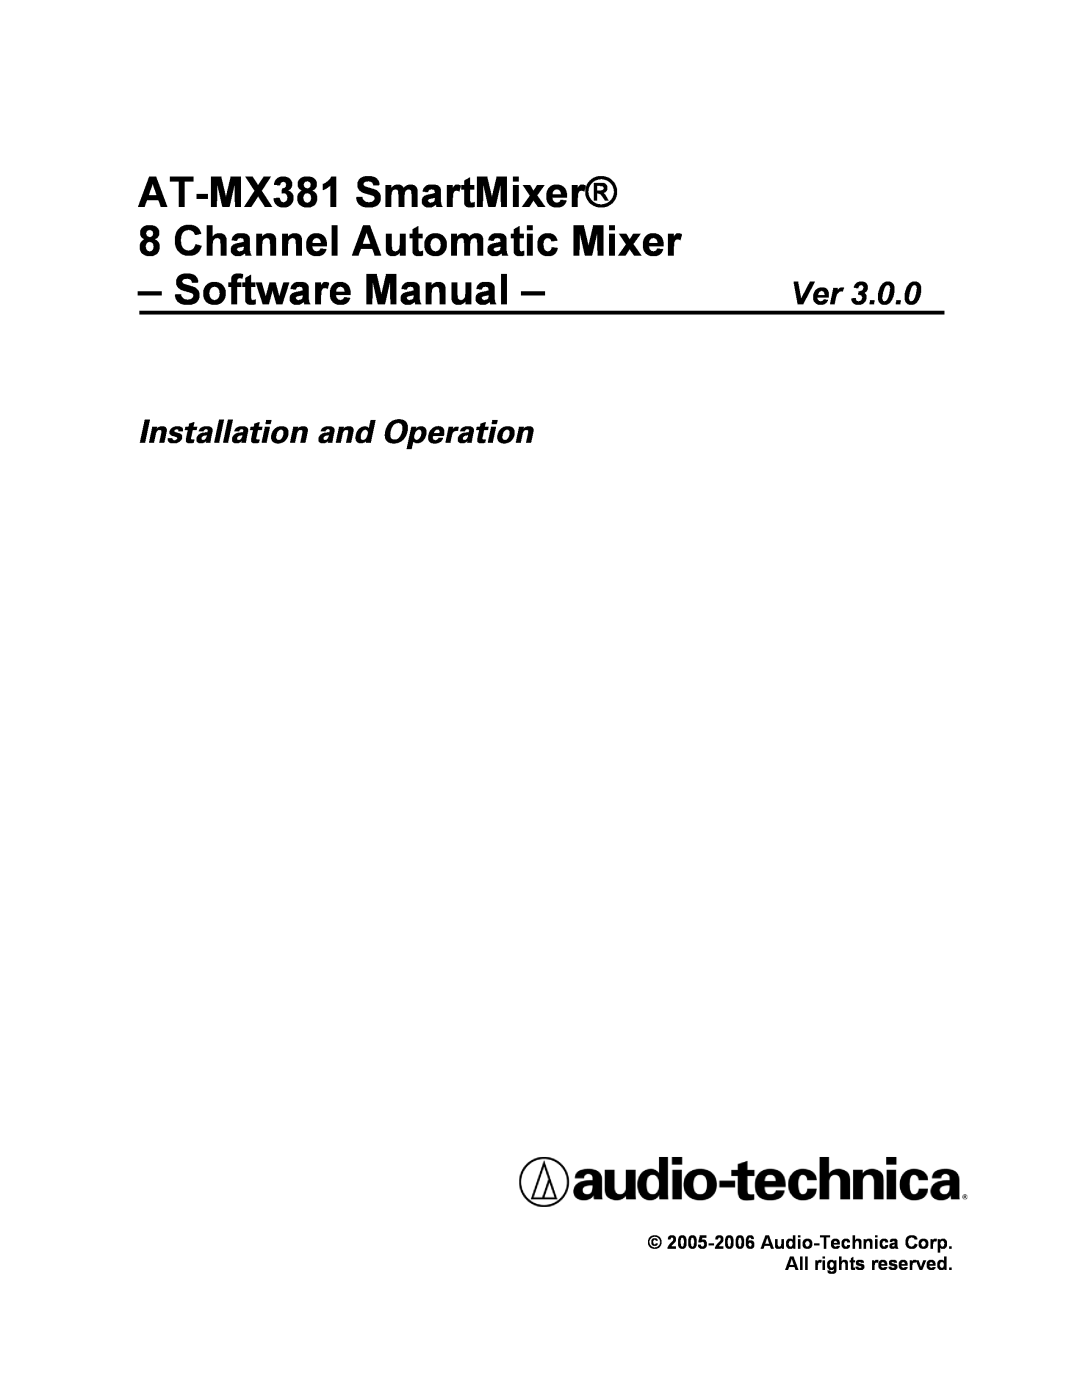 Audio-Technica software manual AT-MX381SmartMixer 8 Channel Automatic Mixer, Software Manual 